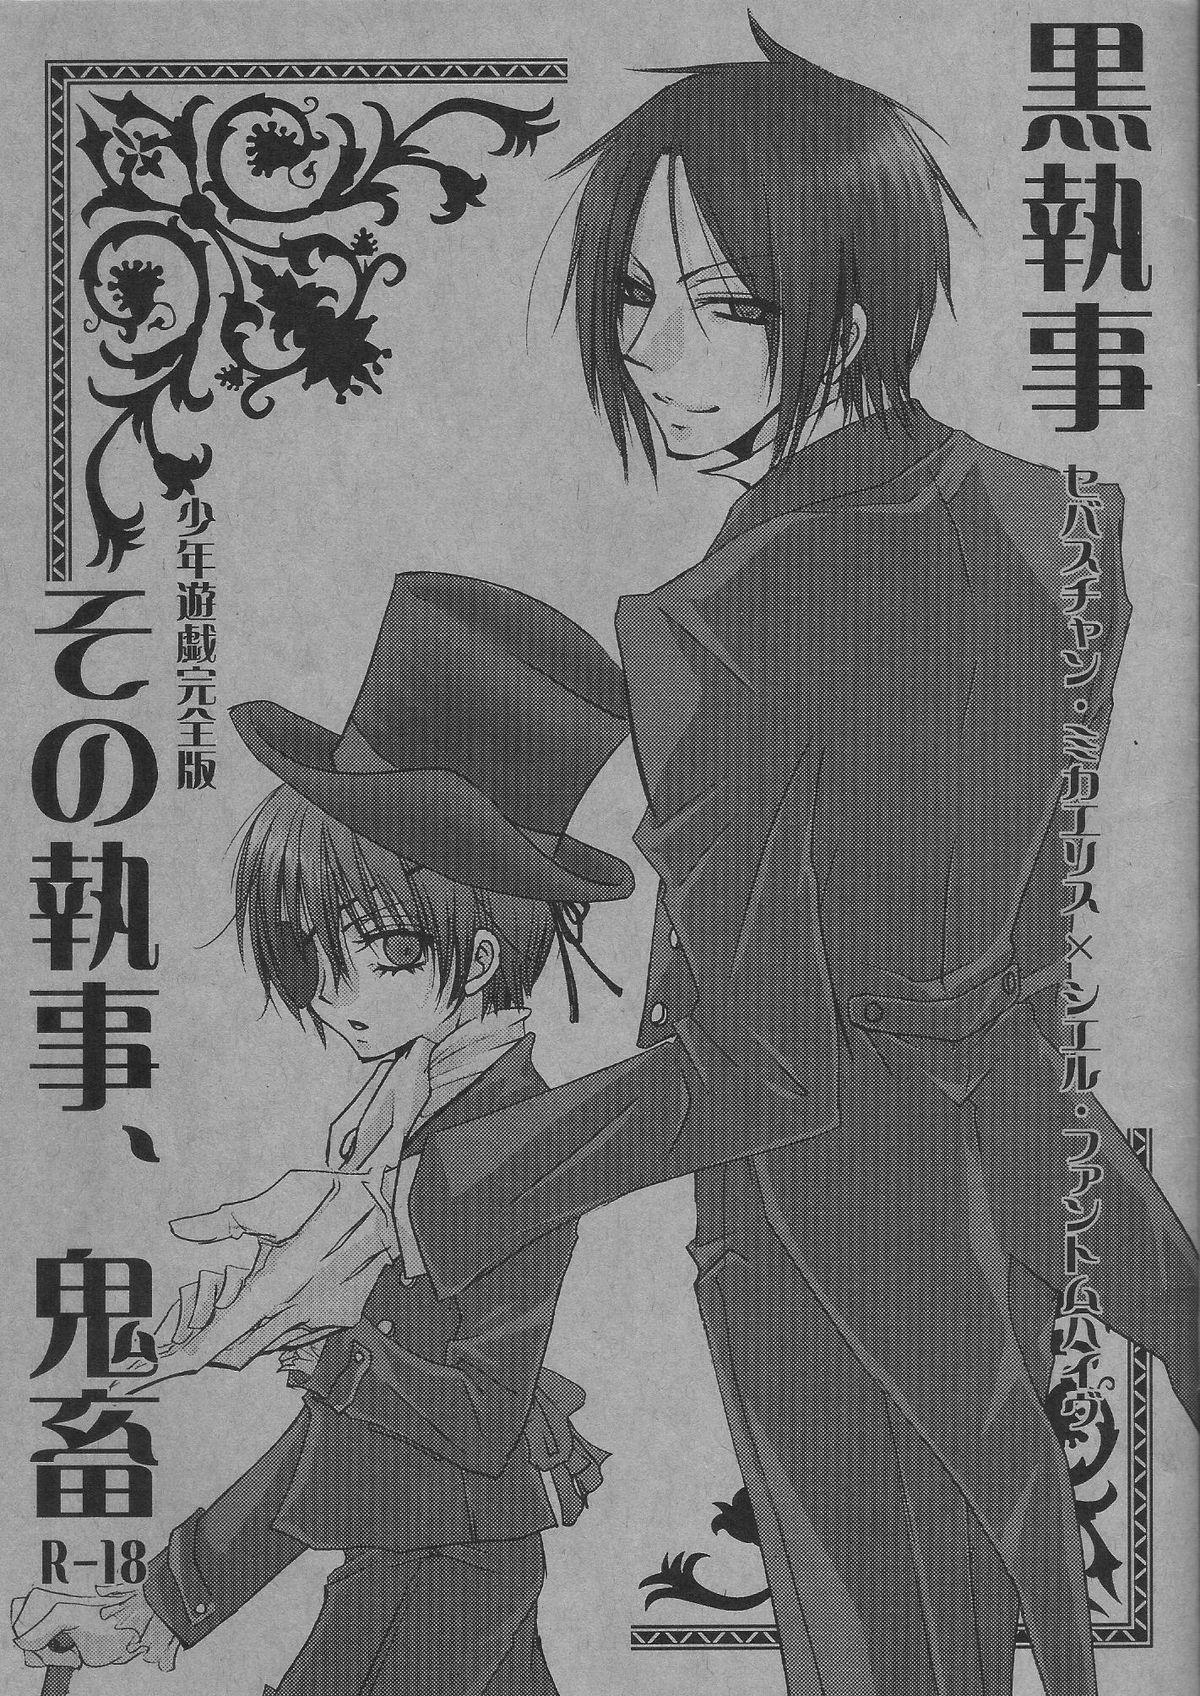 Adult Toys その執事、鬼畜～少年遊戯完全版～ - Black butler Chacal - Picture 1